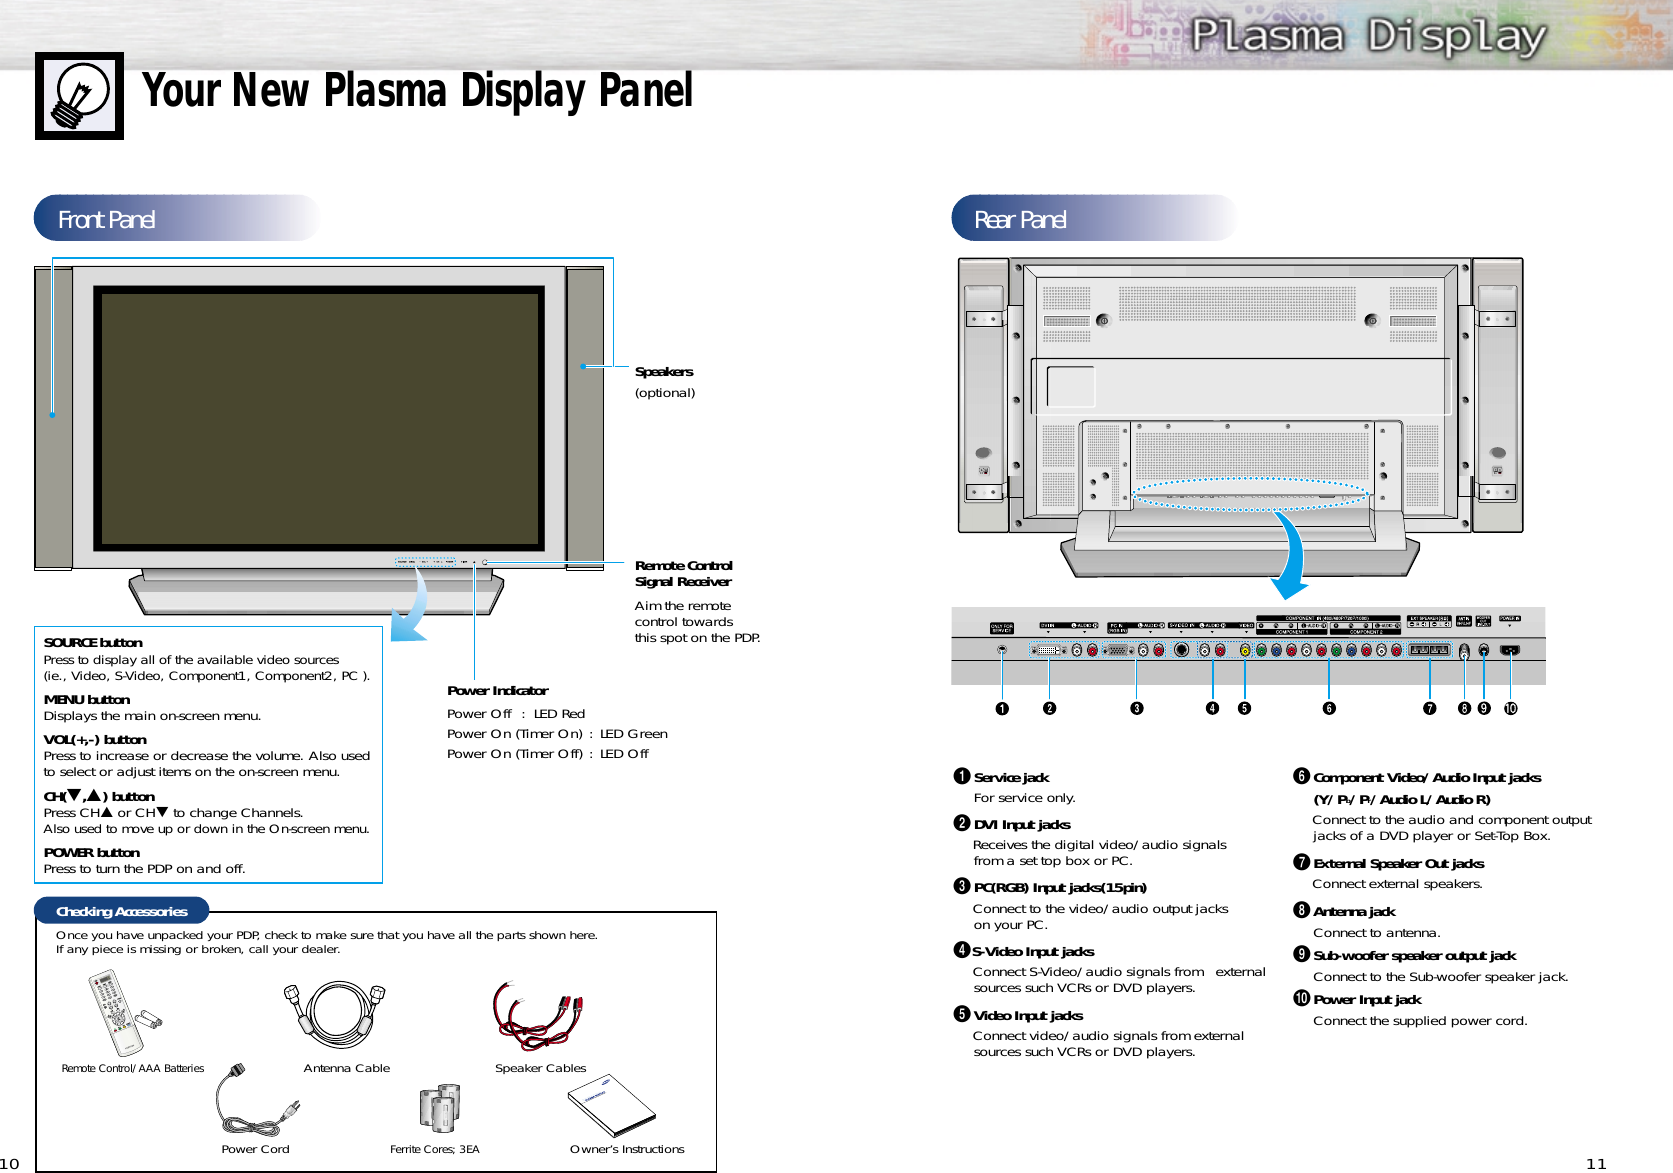 Front Panel11Your New Plasma Display Panel10Rear PanelŒService jackFor service only.´DVI Input jacks Receives the digital video/audio signals from a set top box or PC.ˇPC(RGB) Input jacks(15pin)Connect to the video/audio output jacks on your PC.¨S-Video Input jacksConnect S-Video/audio signals from  externalsources such VCRs or DVD players.ˆVideo Input jacksConnect video/audio signals from externalsources such VCRs or DVD players.ØComponent Video/Audio Input jacks(Y/Pb/Pr/Audio L/Audio R)Connect to the audio and component outputjacks of a DVD player or Set-Top Box.∏External Speaker Out jacksConnect external speakers.”Antenna jackConnect to antenna.’Sub-woofer speaker output jackConnect to the Sub-woofer speaker jack.˝Power Input jackConnect the supplied power cord.Remote Control Signal Receiver Aim the remote control towards this spot on the PDP.Power Indicator Power Off : LED RedPower On (Timer On) : LED GreenPower On (Timer Off) : LED OffChecking AccessoriesSpeakers(optional)SOURCE buttonPress to display all of the available video sources(ie., Video, S-Video, Component1, Component2, PC ).MENU buttonDisplays the main on-screen menu.VOL(+,-) buttonPress to increase or decrease the volume. Also usedto select or adjust items on the on-screen menu.  CH(▼,▲) buttonPress CH▲ or CH▼to change Channels. Also used to move up or down in the On-screen menu.POWER buttonPress to turn the PDP on and off.Remote Control/AAA Batteries Antenna Cable Speaker CablesPower Cord Owner’s InstructionsFerrite Cores; 3EAOnce you have unpacked your PDP, check to make sure that you have all the parts shown here.If any piece is missing or broken, call your dealer. 